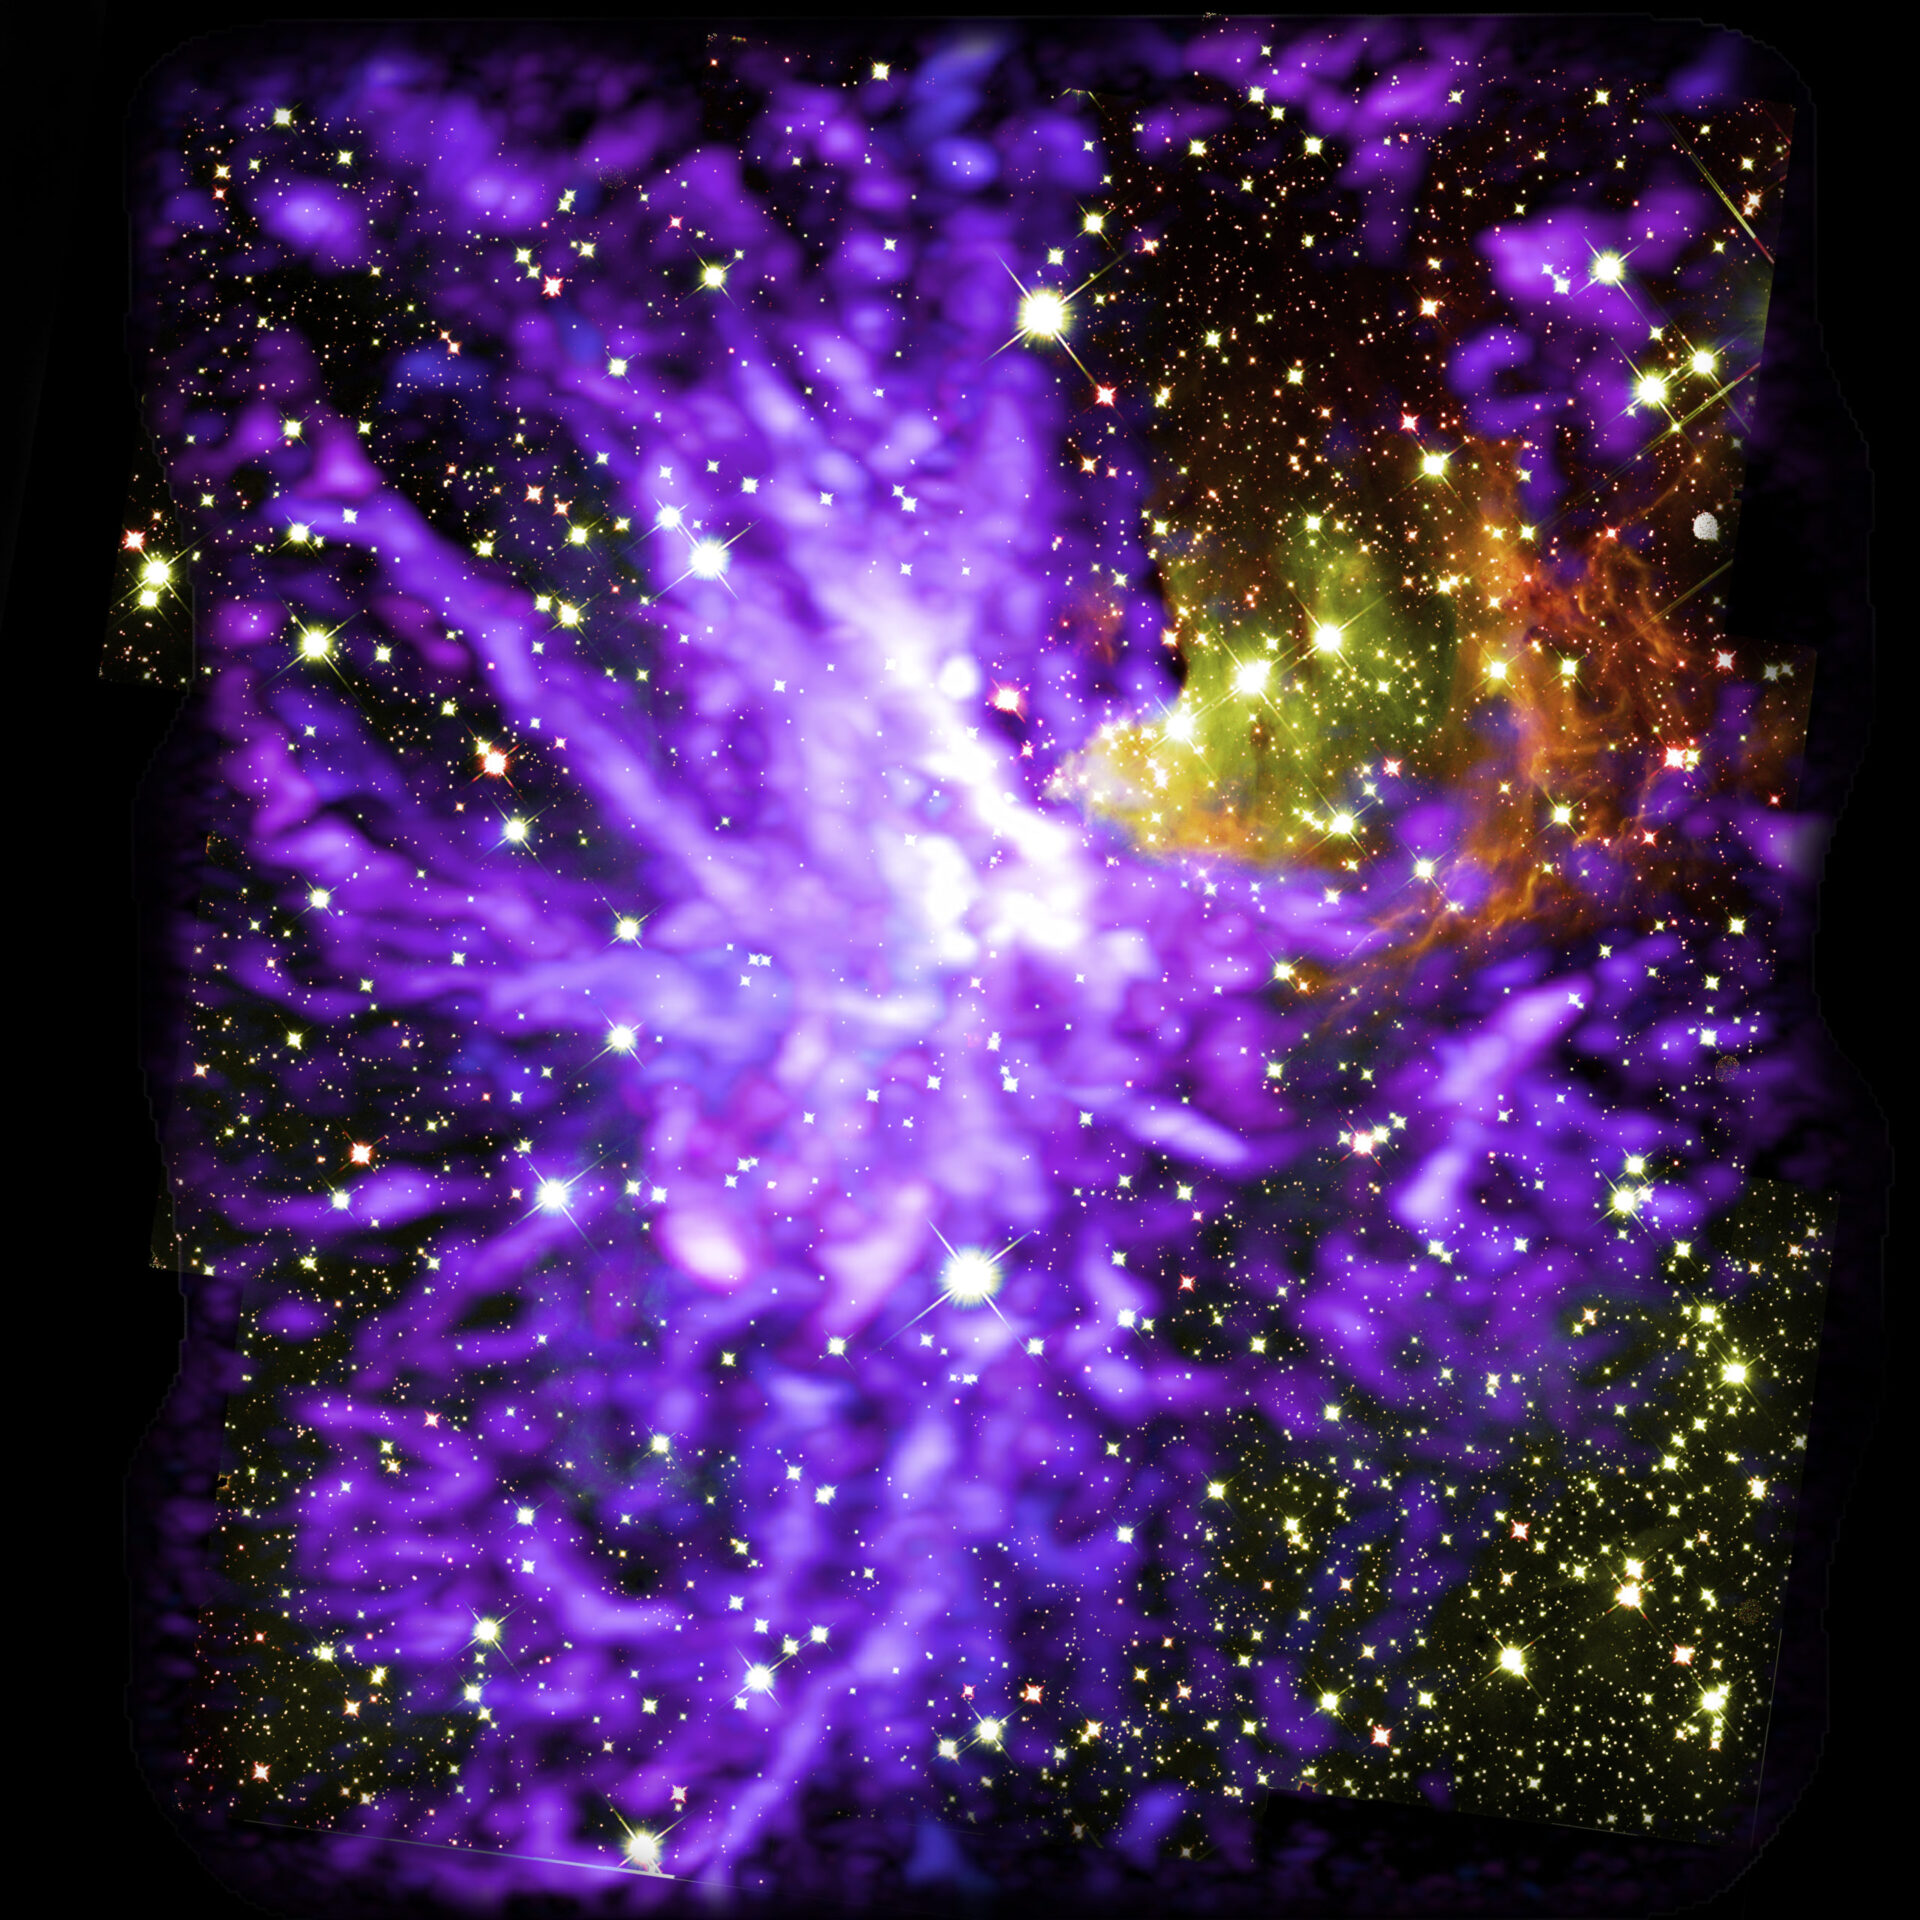 <p>Image of star cluster G286.21+0.17, caught in the act of formation. This is a multiwavelength mosaic of more than 750 ALMA radio images, and 9 Hubble infrared images. ALMA shows molecular clouds (purple) and Hubble shows stars and glowing dust (yellow and red). Credit: ALMA (ESO/NAOJ/NRAO), Y. Cheng et al.; NRAO/AUI/NSF, S. Dagnello; NASA/ESA Hubble.</p>
